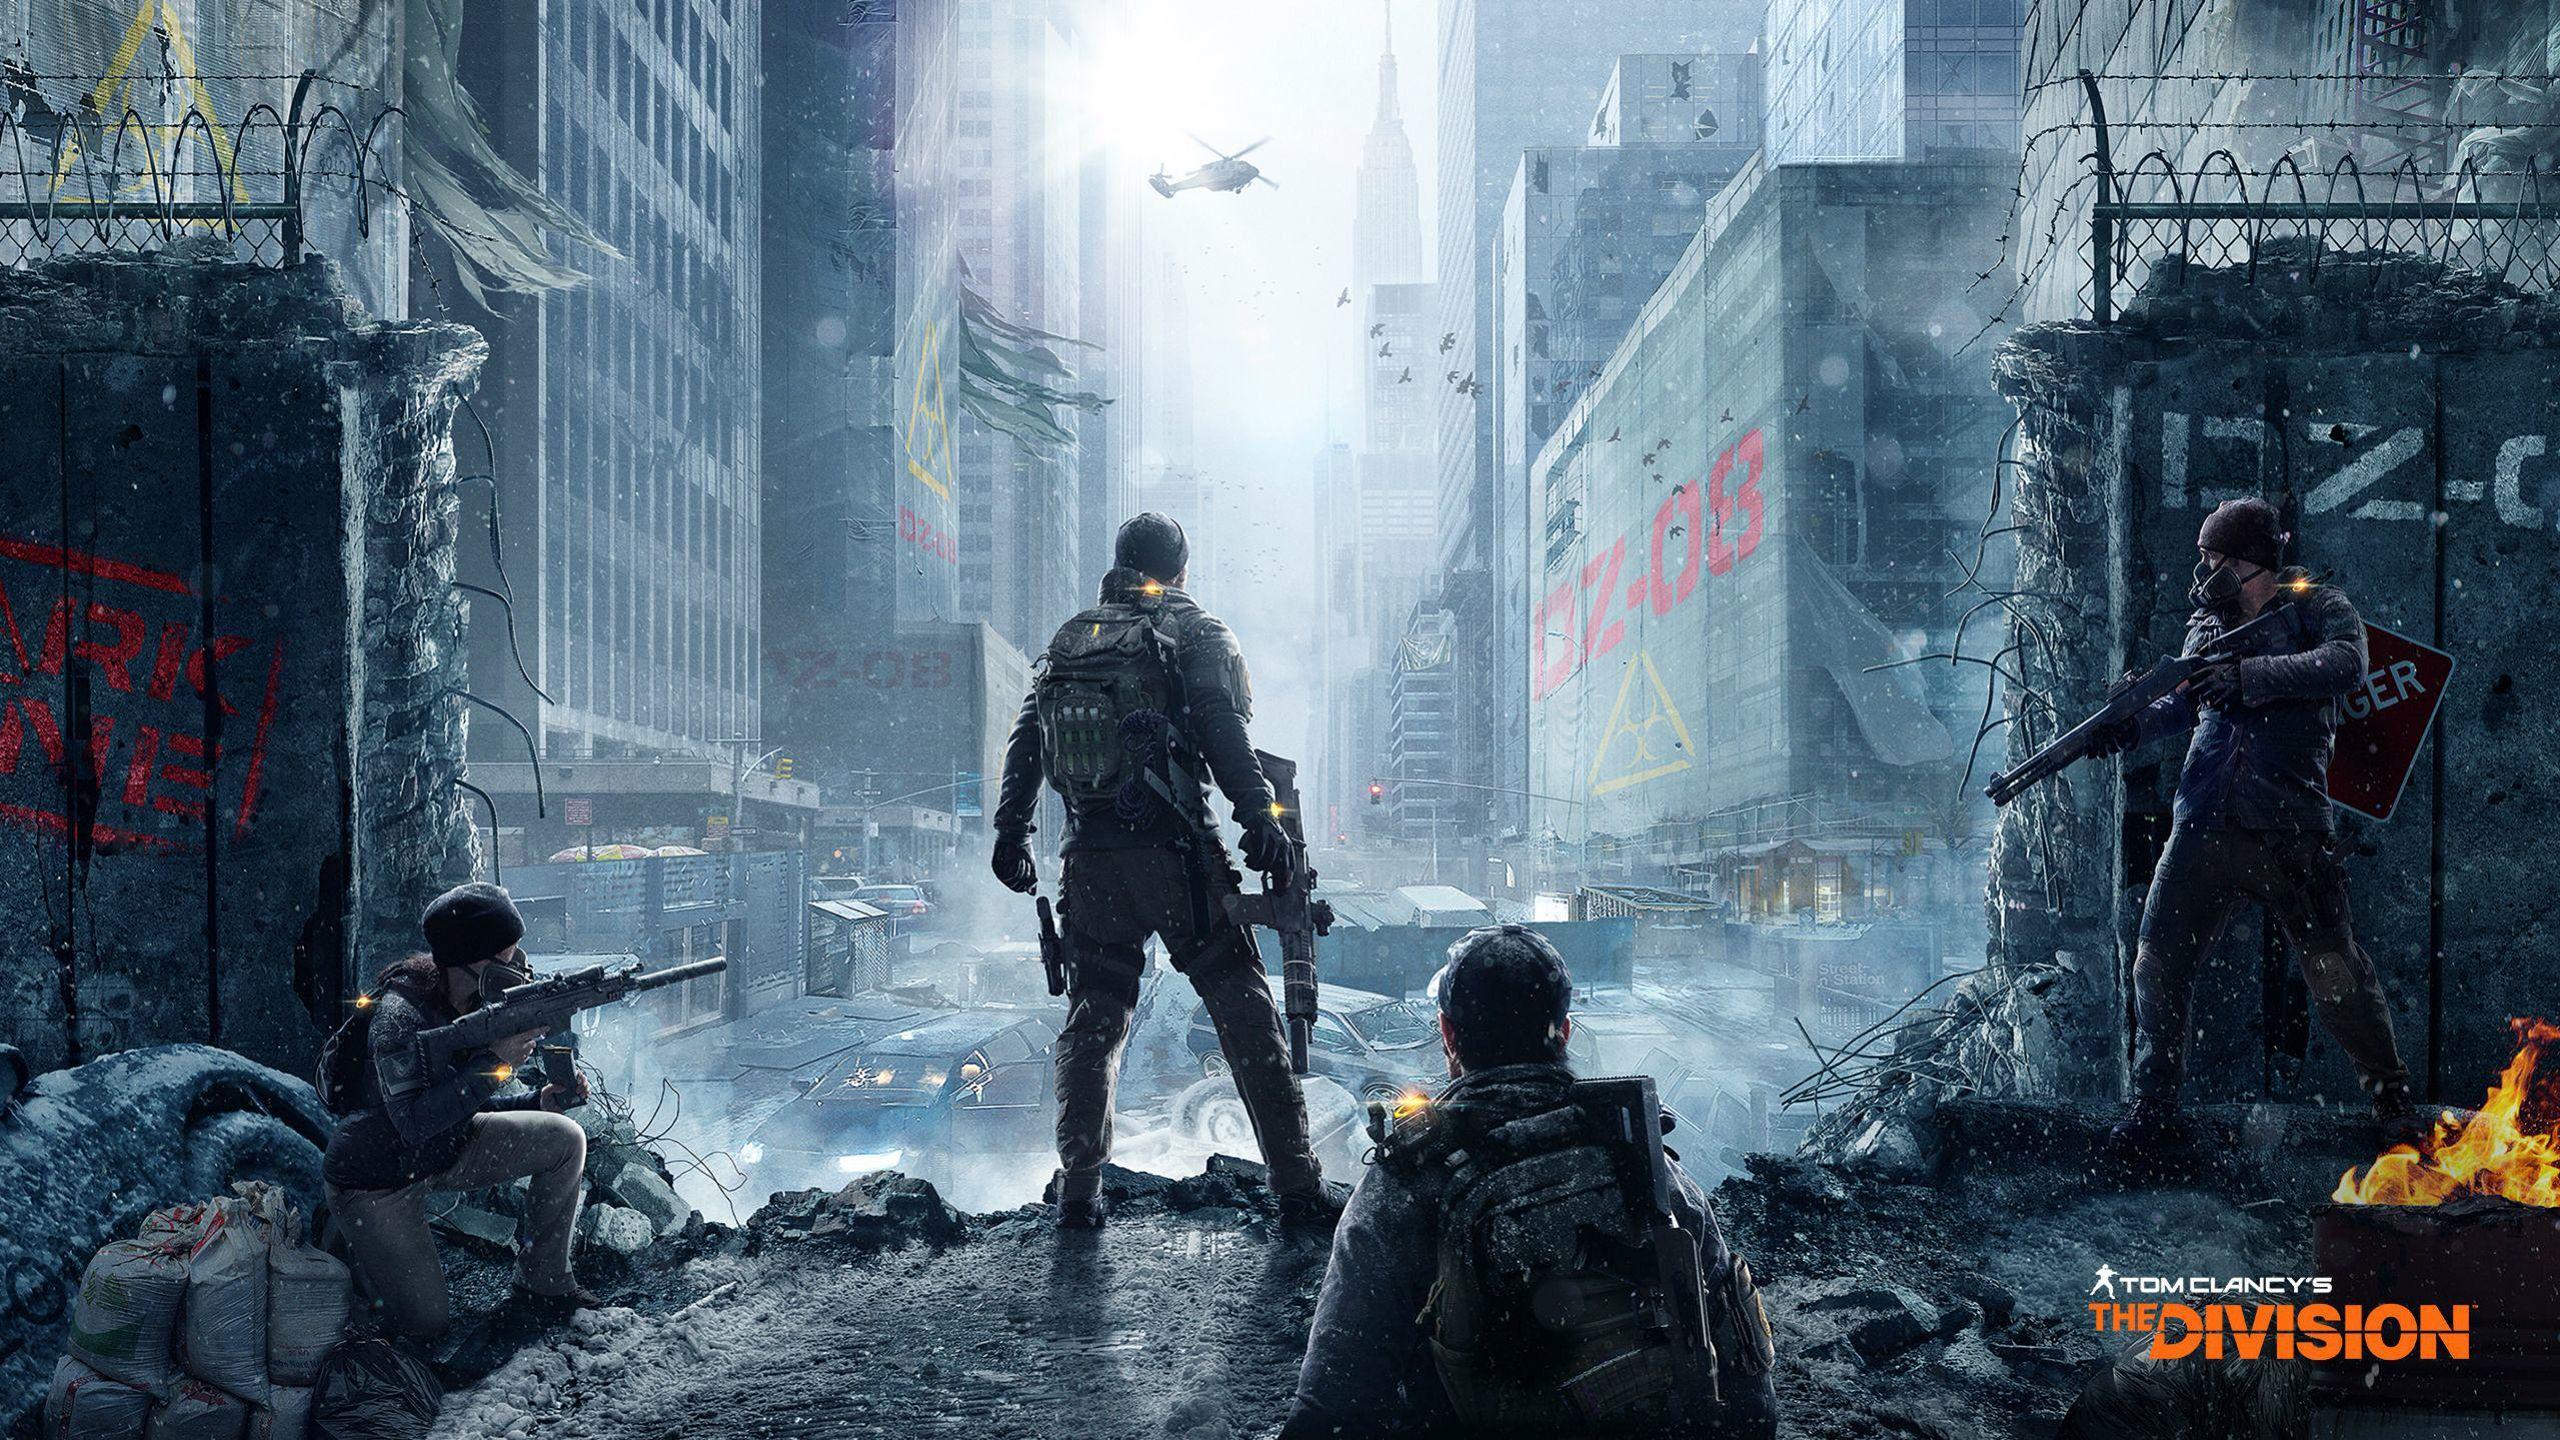 Tom Clancy's The Division HD Wallpaper 2 X 1440